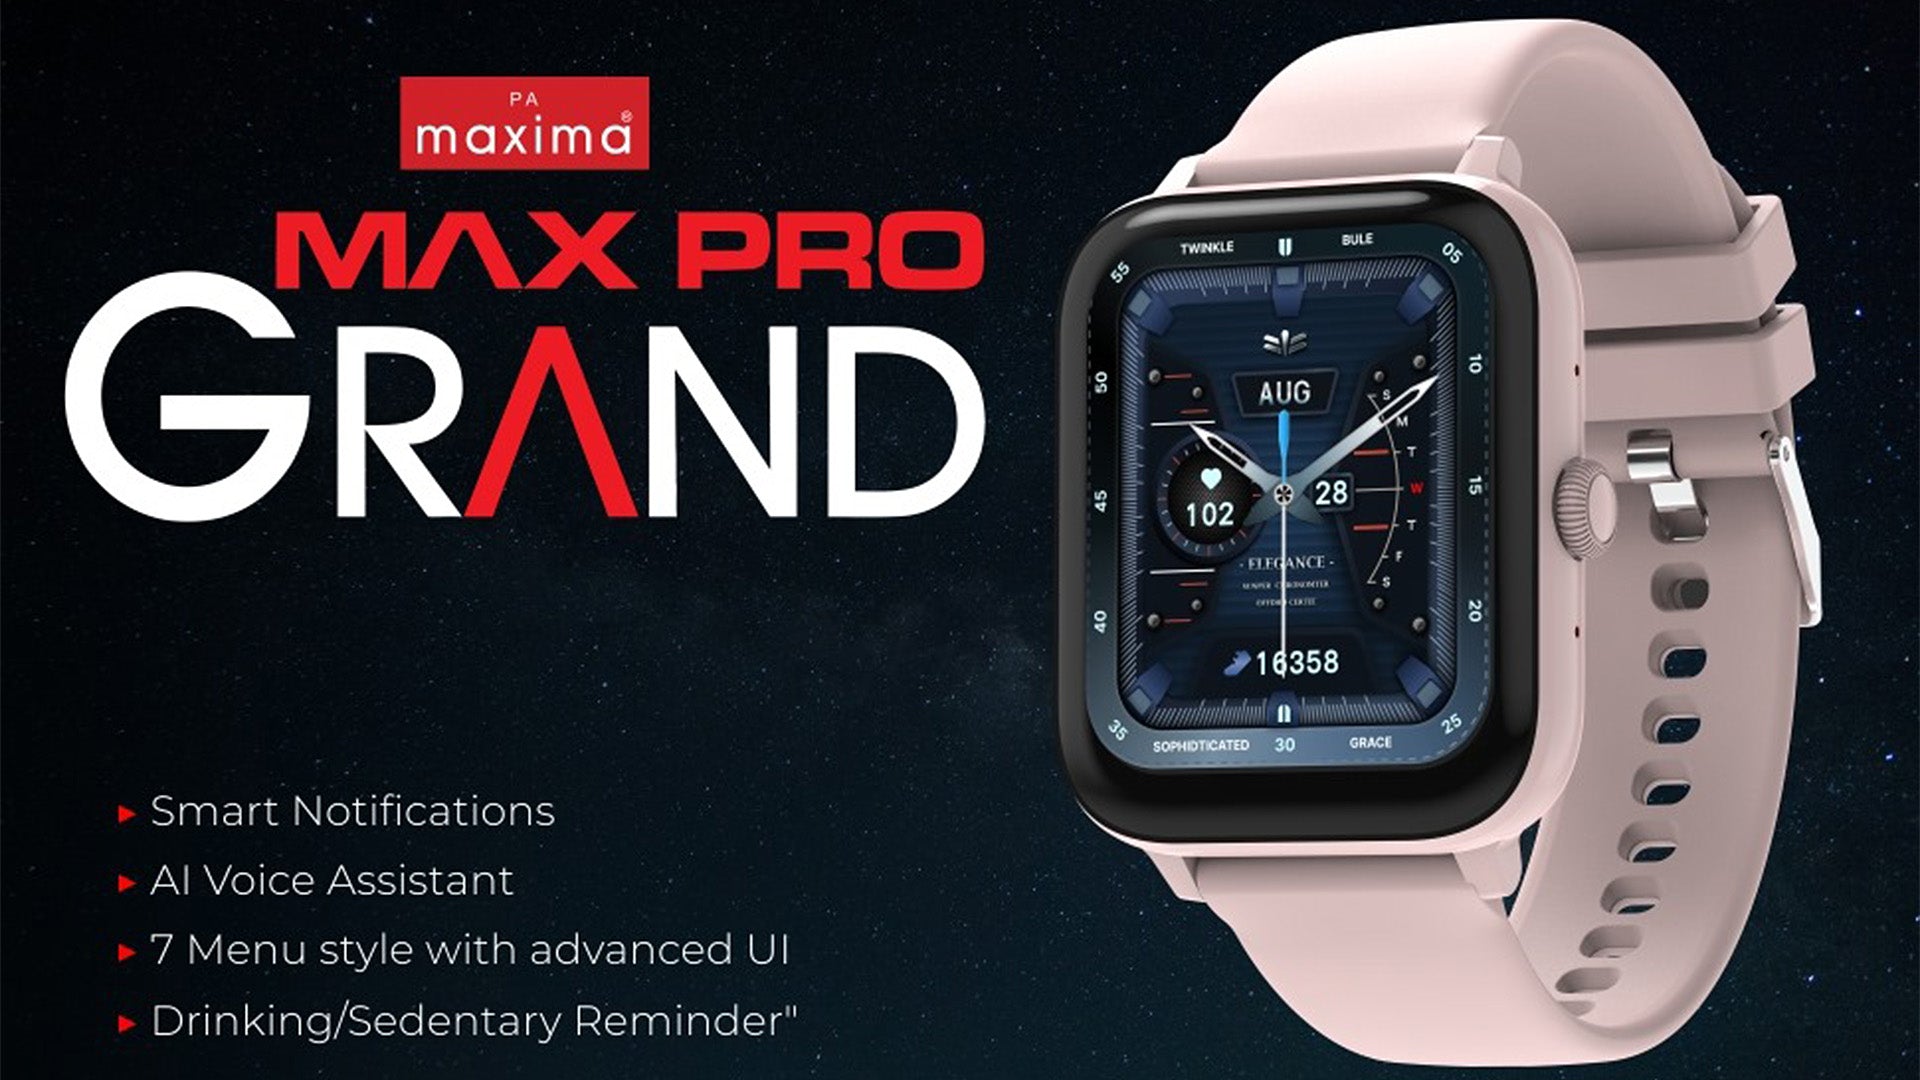 Maxima New Max Pro Grand Smartwatch 1.83 HD 2.5D curved Display